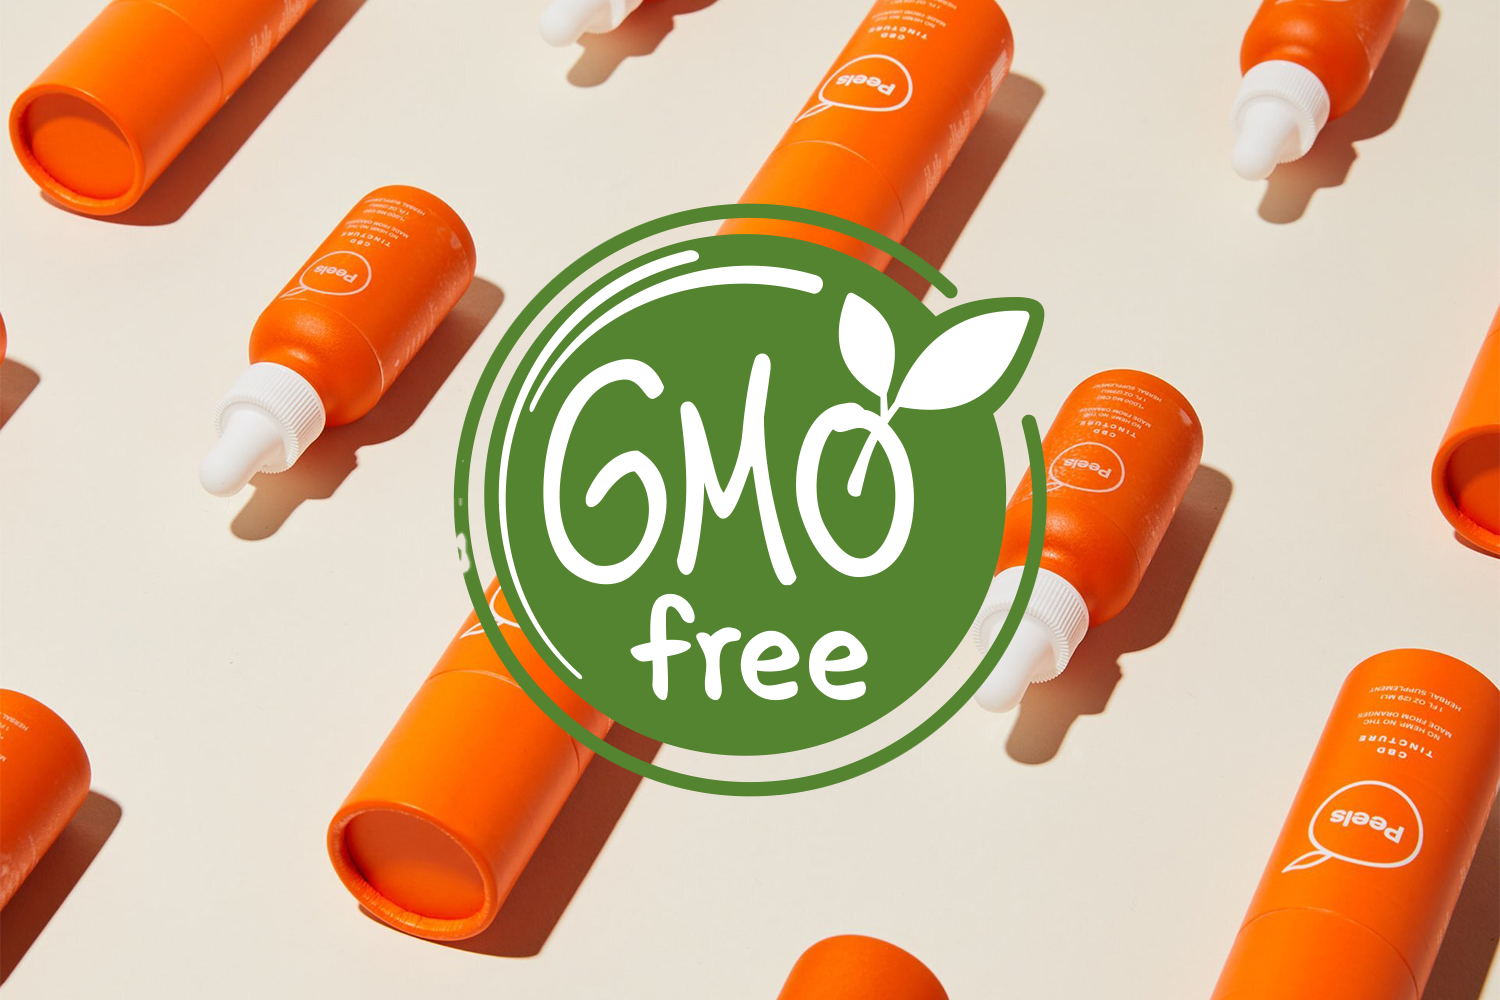 What Does Non-GMO Mean on Packaging?